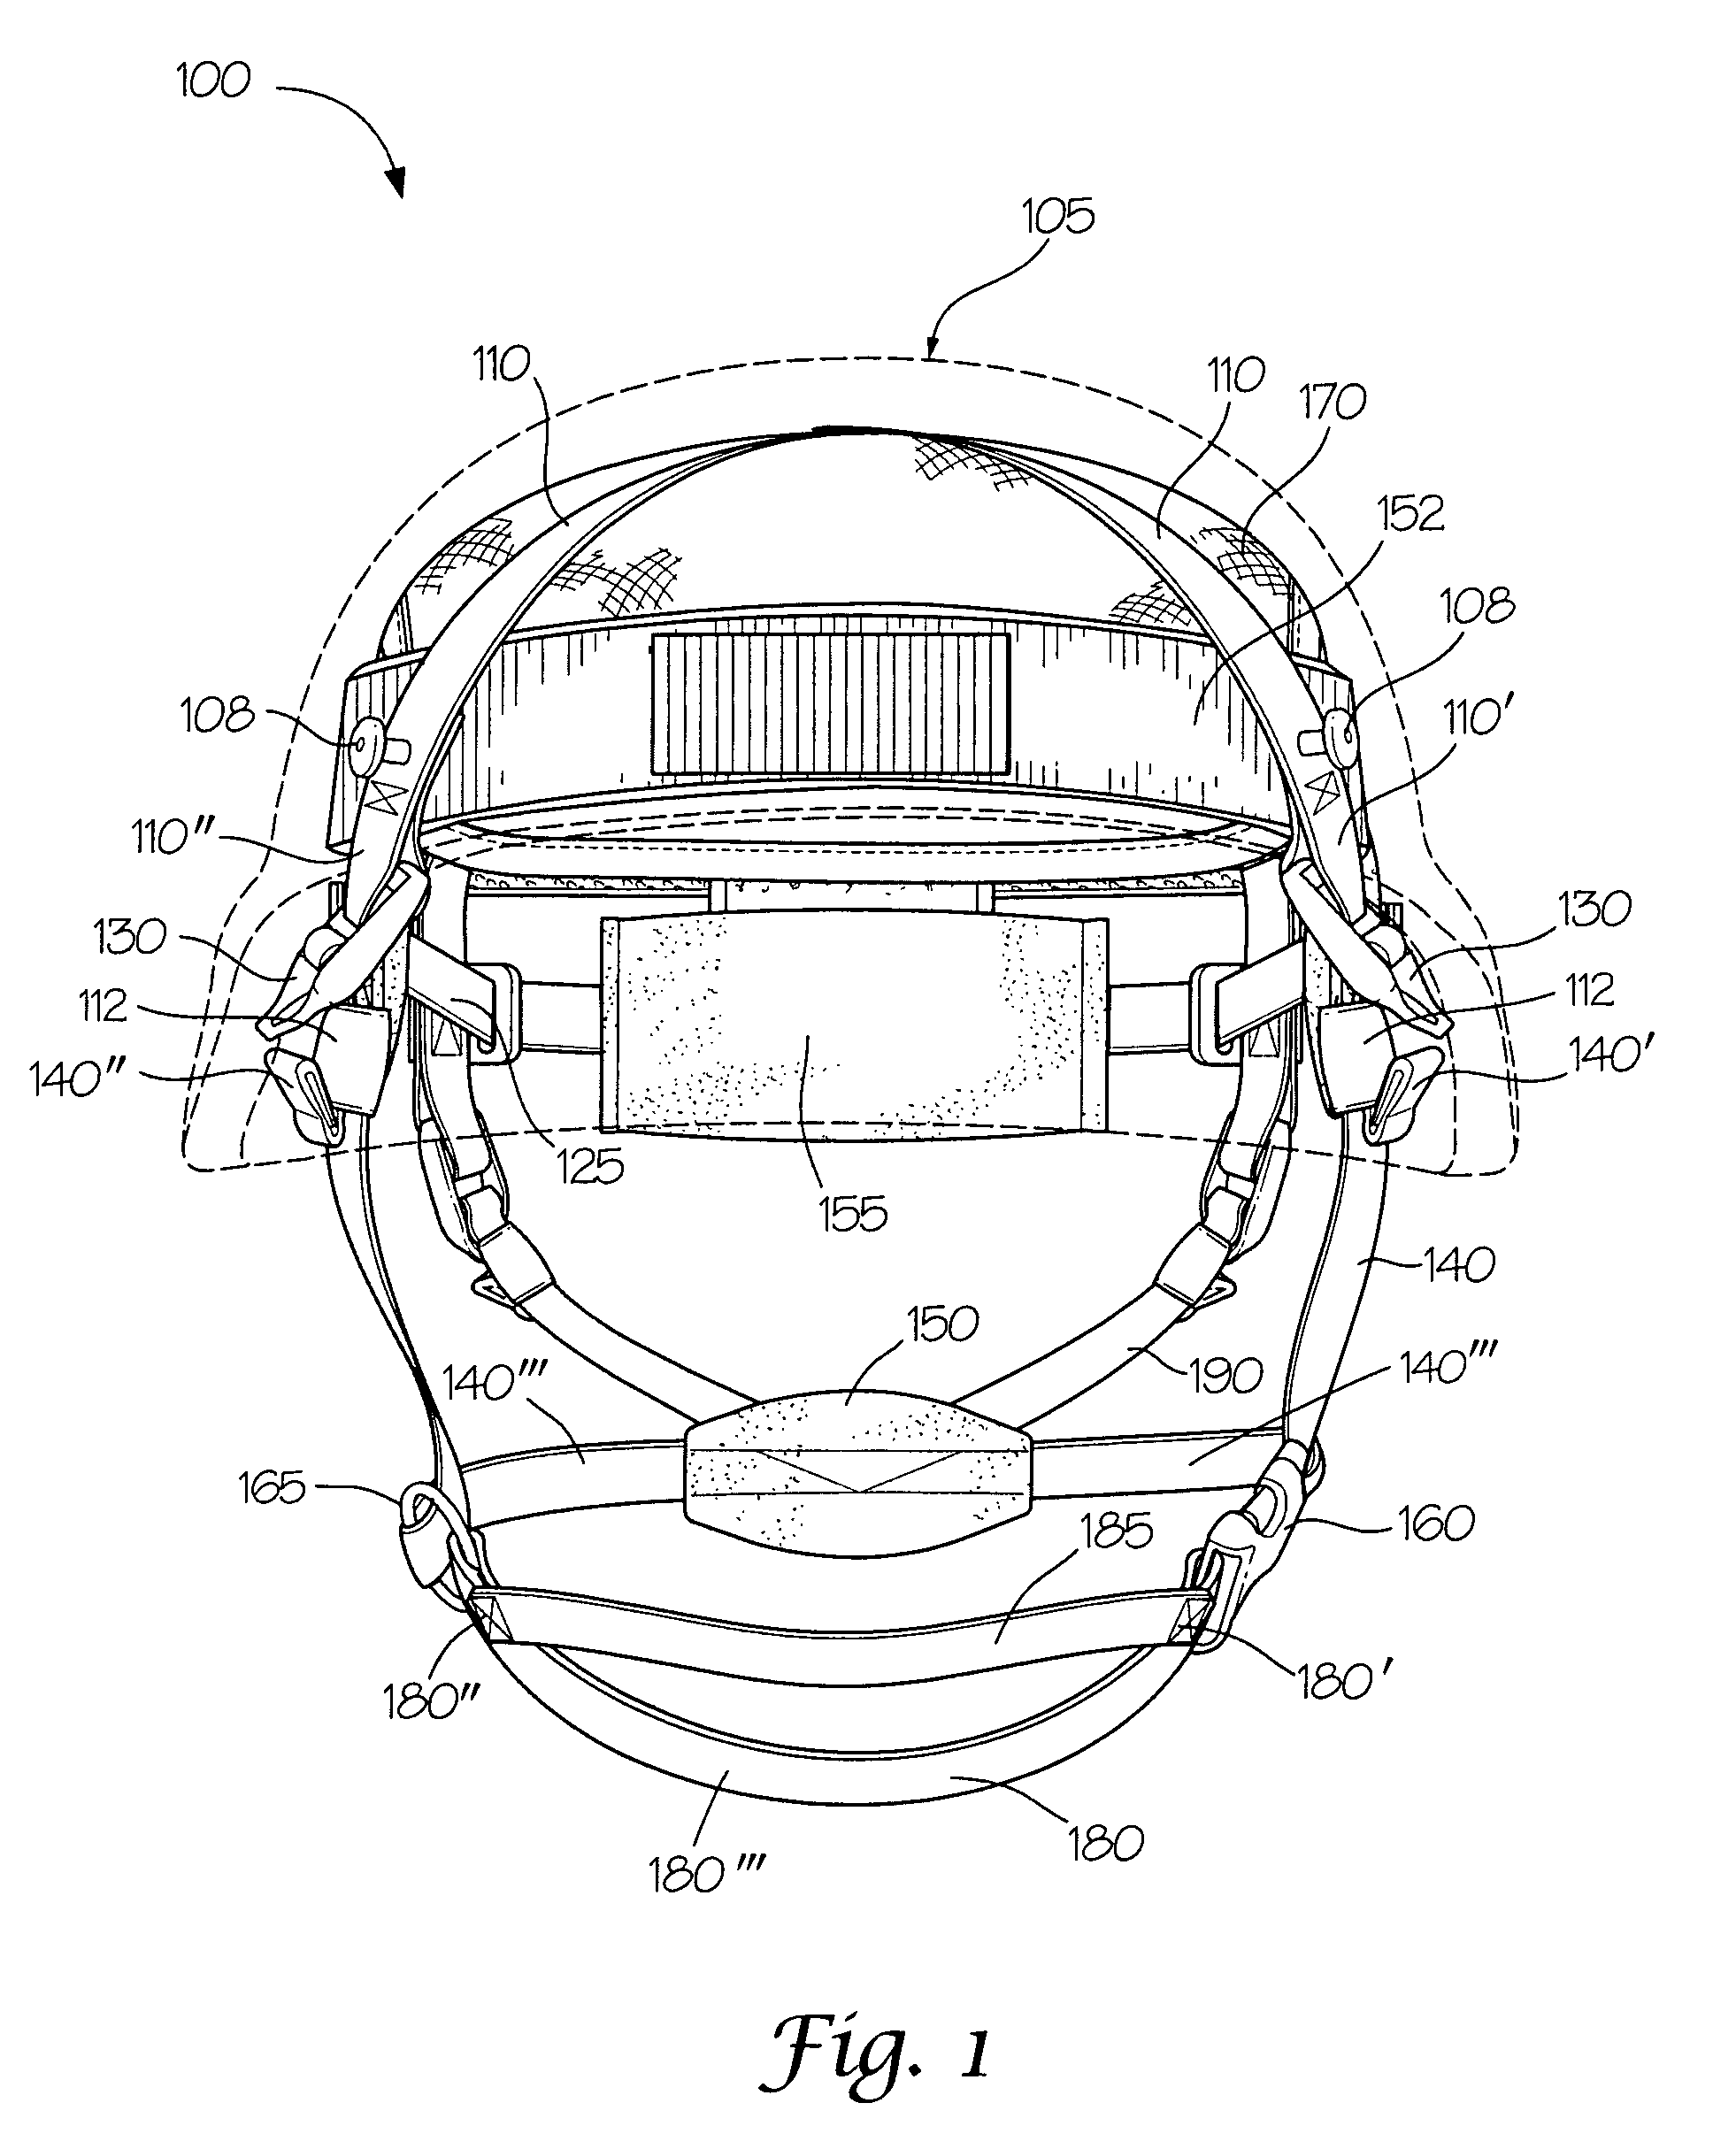 Suspension system and chin strap assembly for a helmet